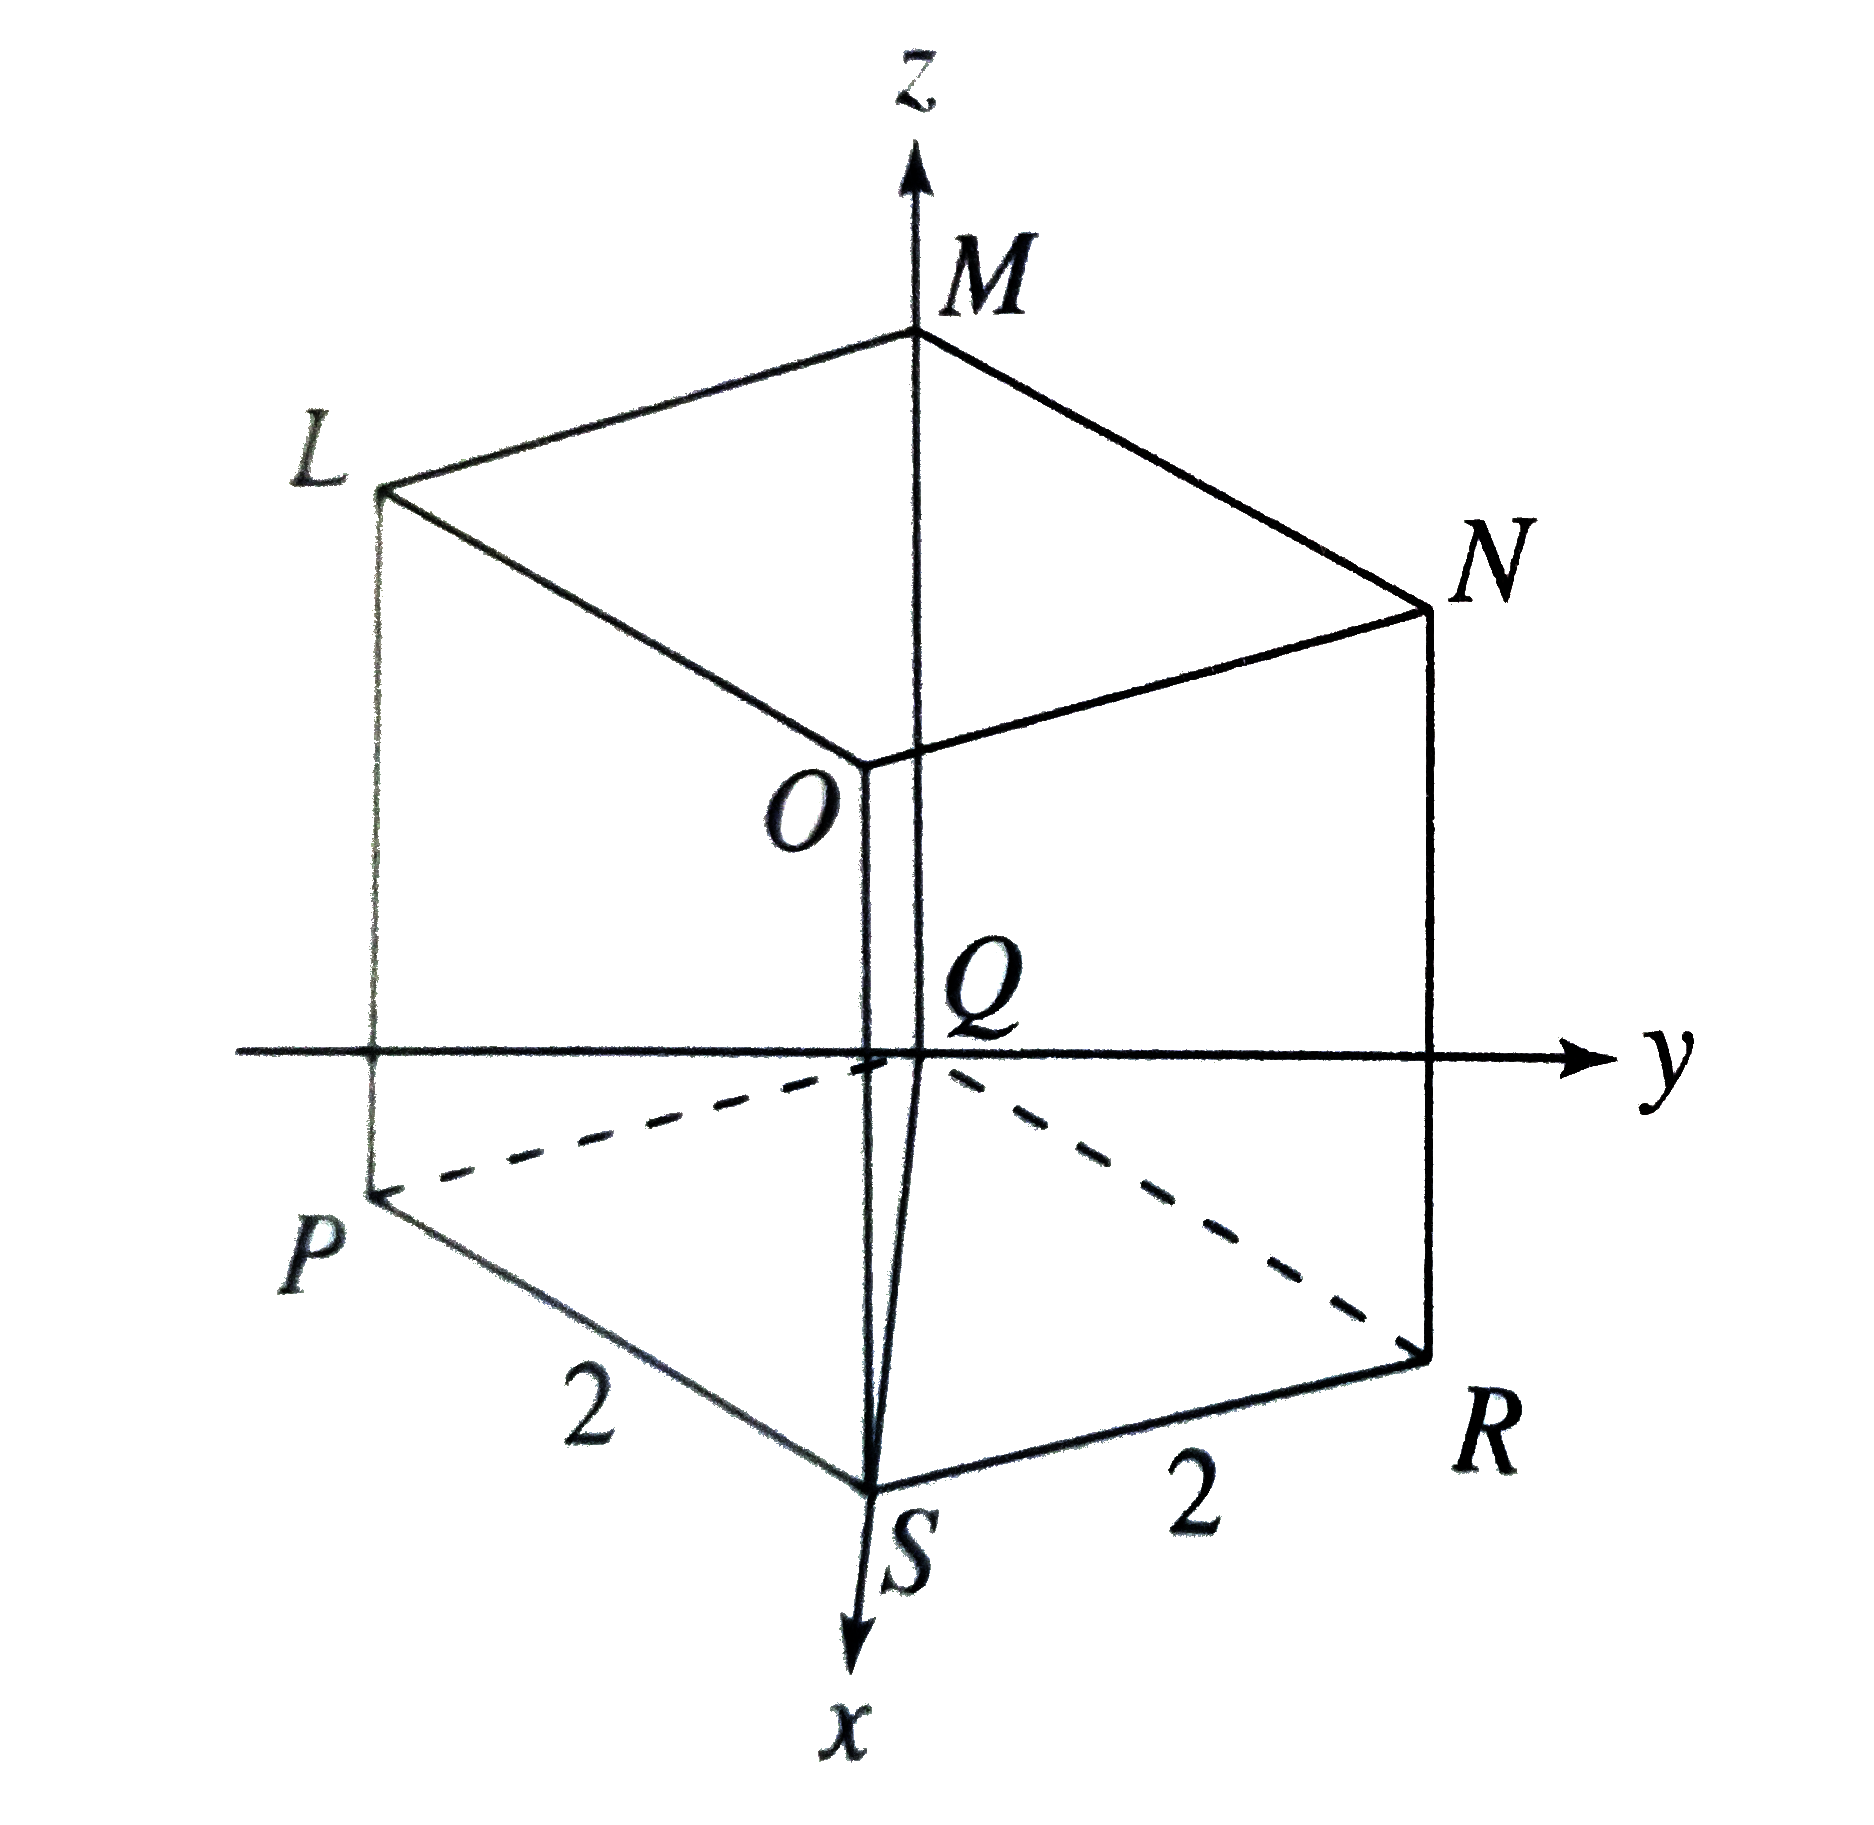 As shown in the (x,y,z) coordinate space below, the cube with vertices L through S has edges that are  2 coordinate units long. The coordinates of  Q are (0,0,0) and S is on the positive x-axis . What are the coordinates  of O ?